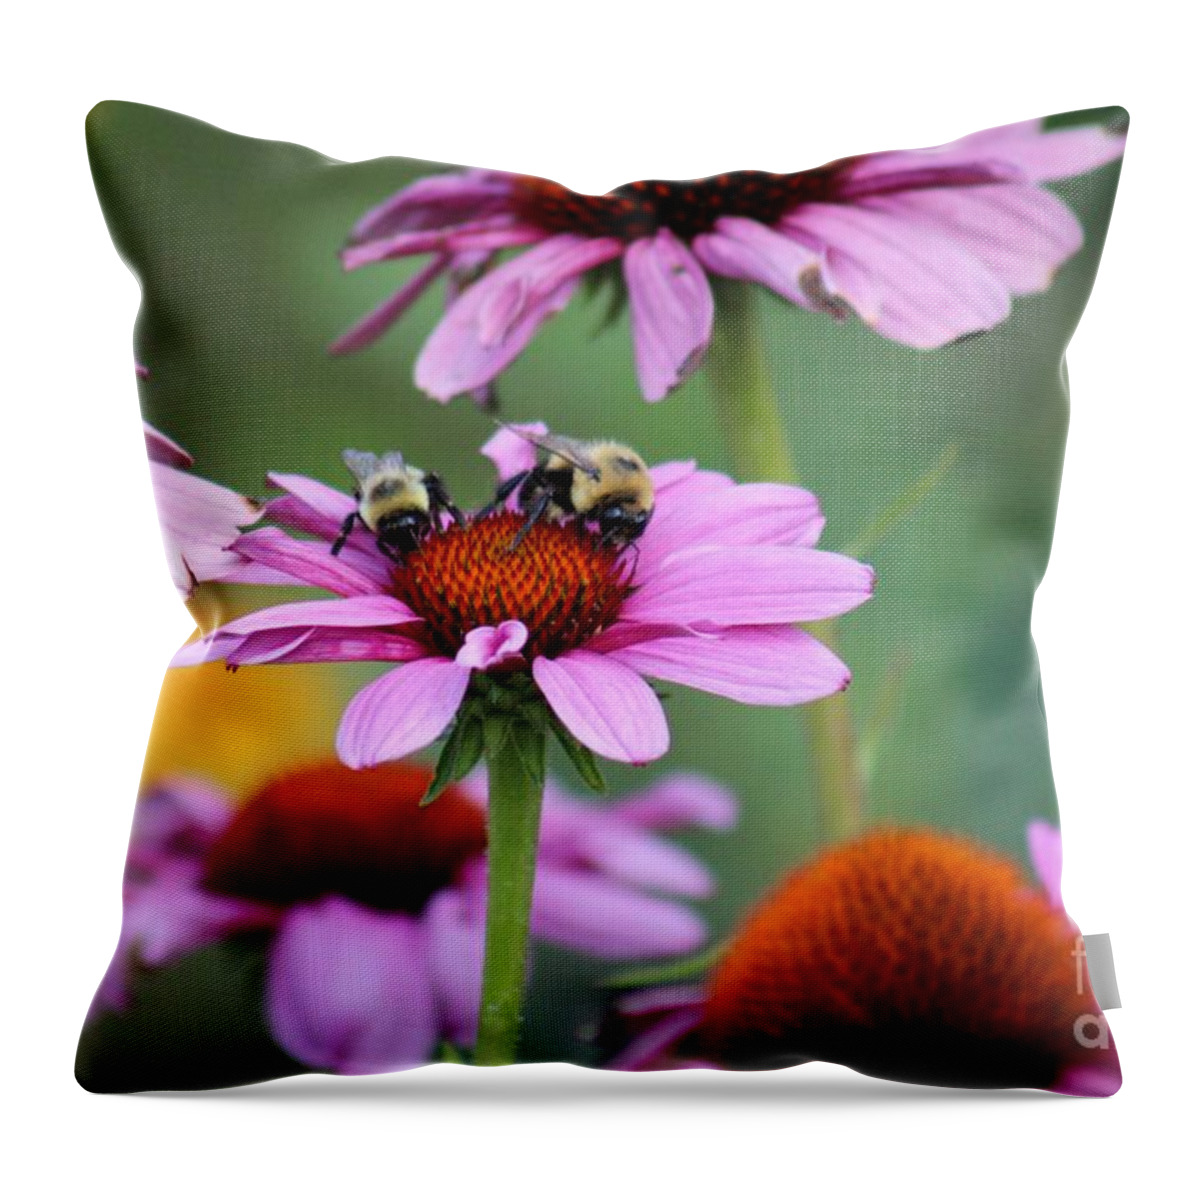 Pink Throw Pillow featuring the photograph Nature's Beauty 66 by Deena Withycombe